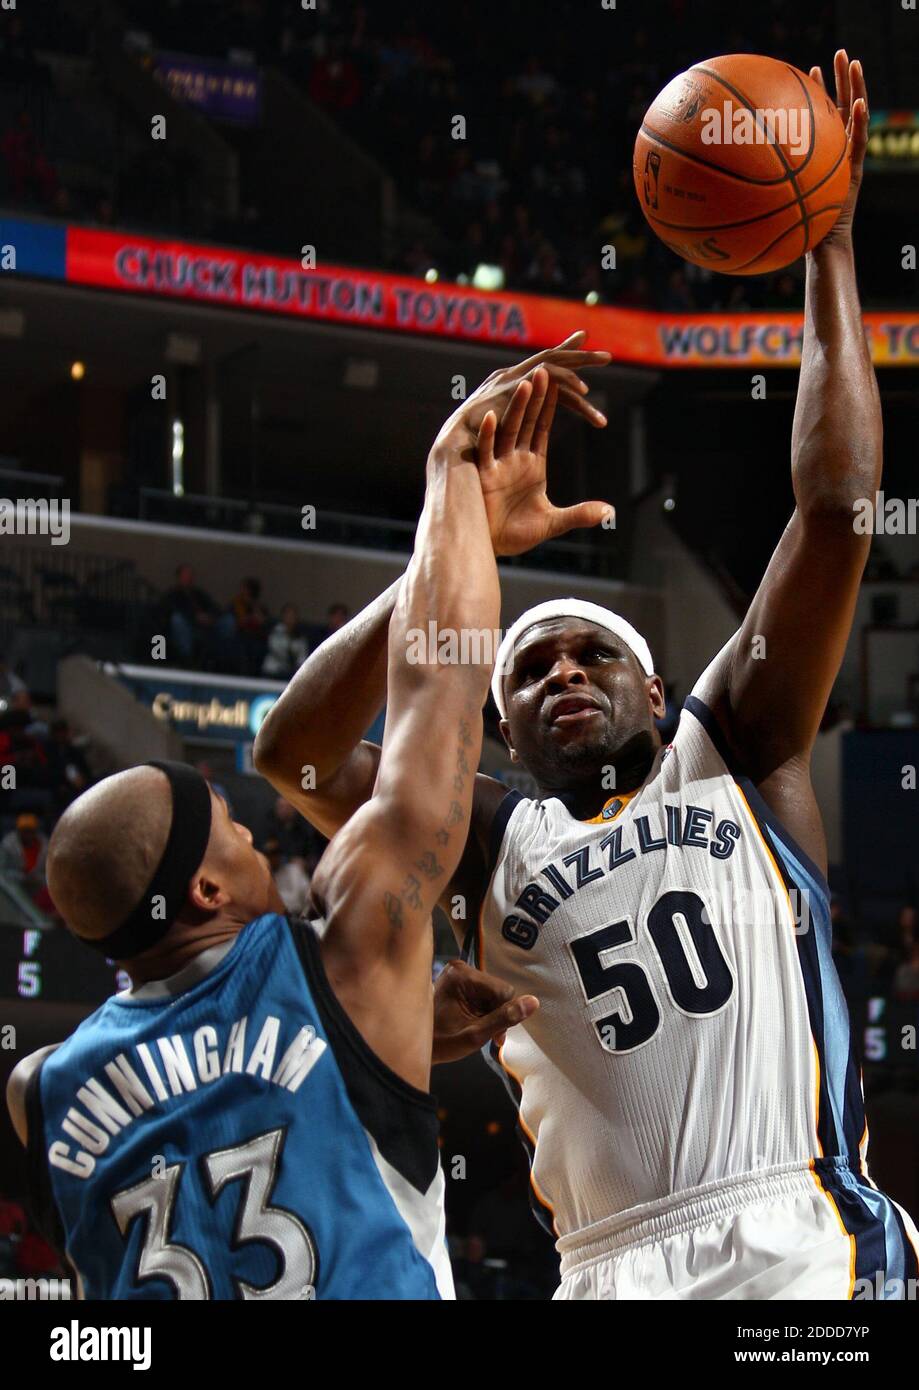 NO FILM, NO VIDEO, NO TV, NO DOCUMENTARY - Memphis Grizzlies forward Zach Randolph (50) is fouled by Minnesota Timberwolves forward Dante Cunningham (33) at the FedExForum in Memphis, TN, USA on December 15, 2013. Photo by Nikki Boertman/The Commercial Appeal/MCT/ABACAPRESS.COM Stock Photo